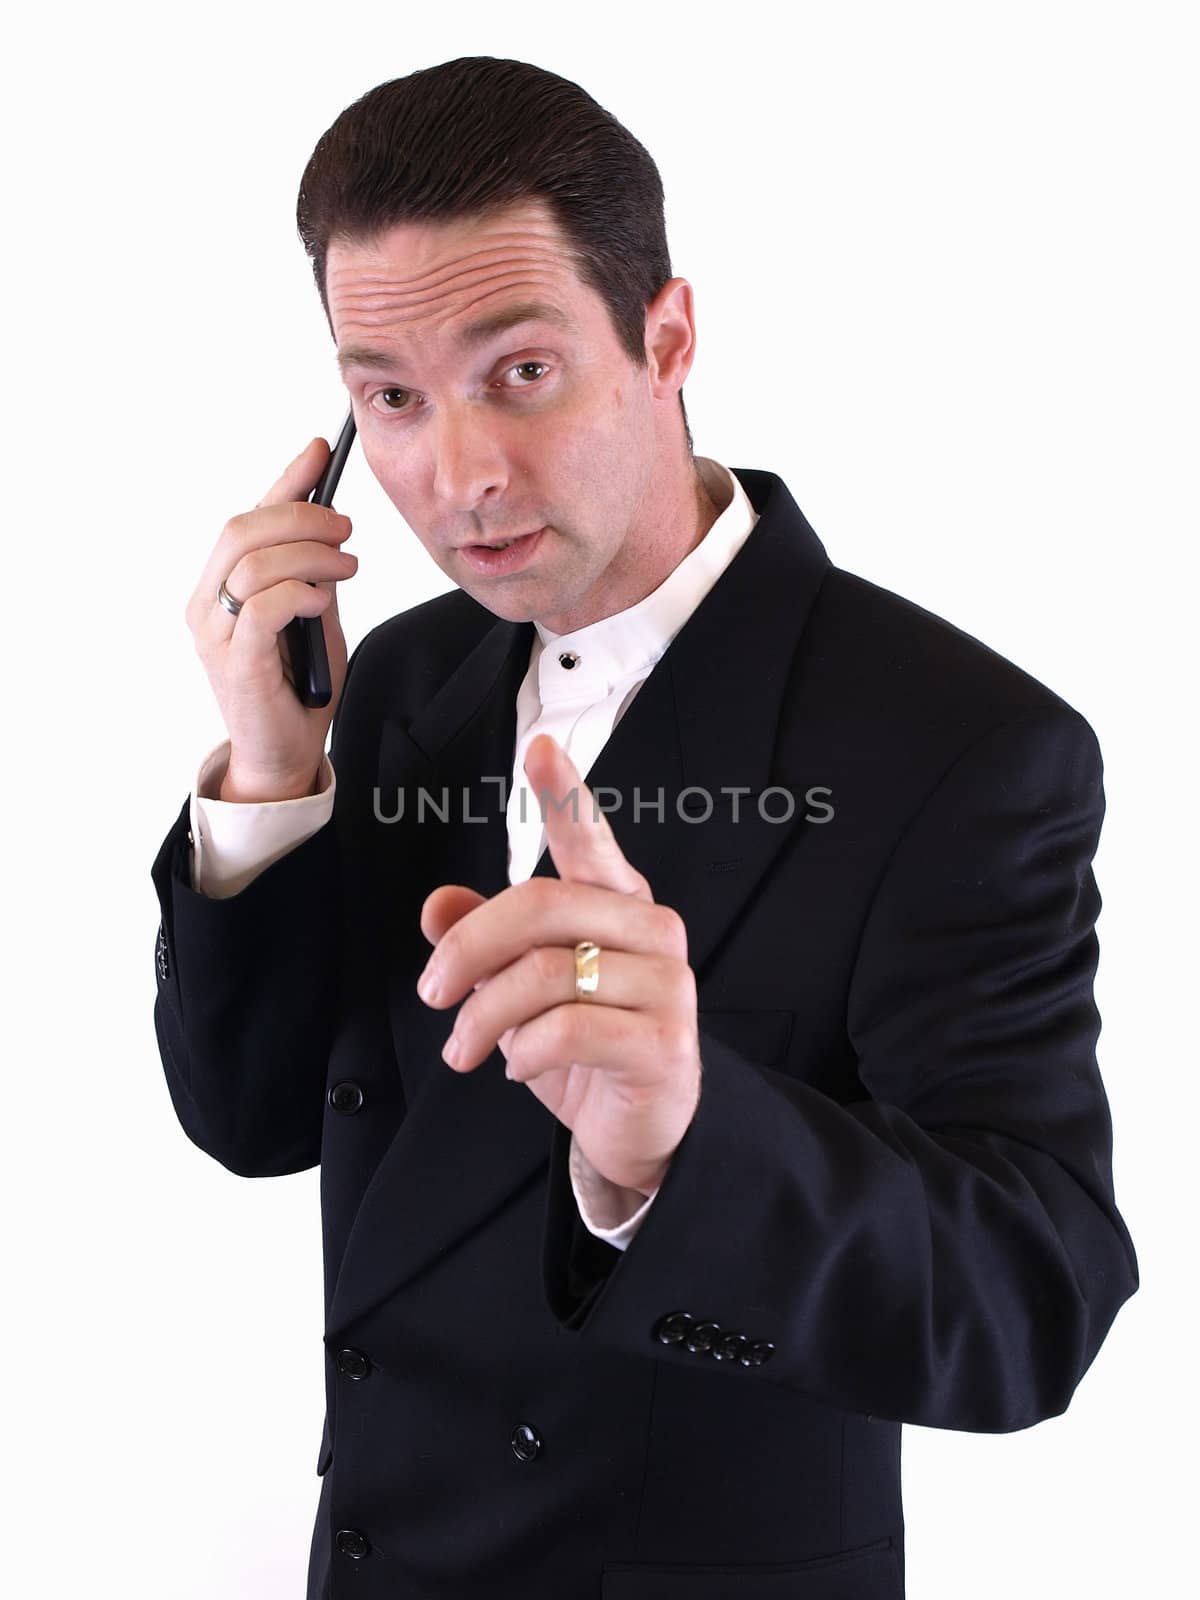 A man in a black suit holds up his finger to signal he is busy and on the telephone.